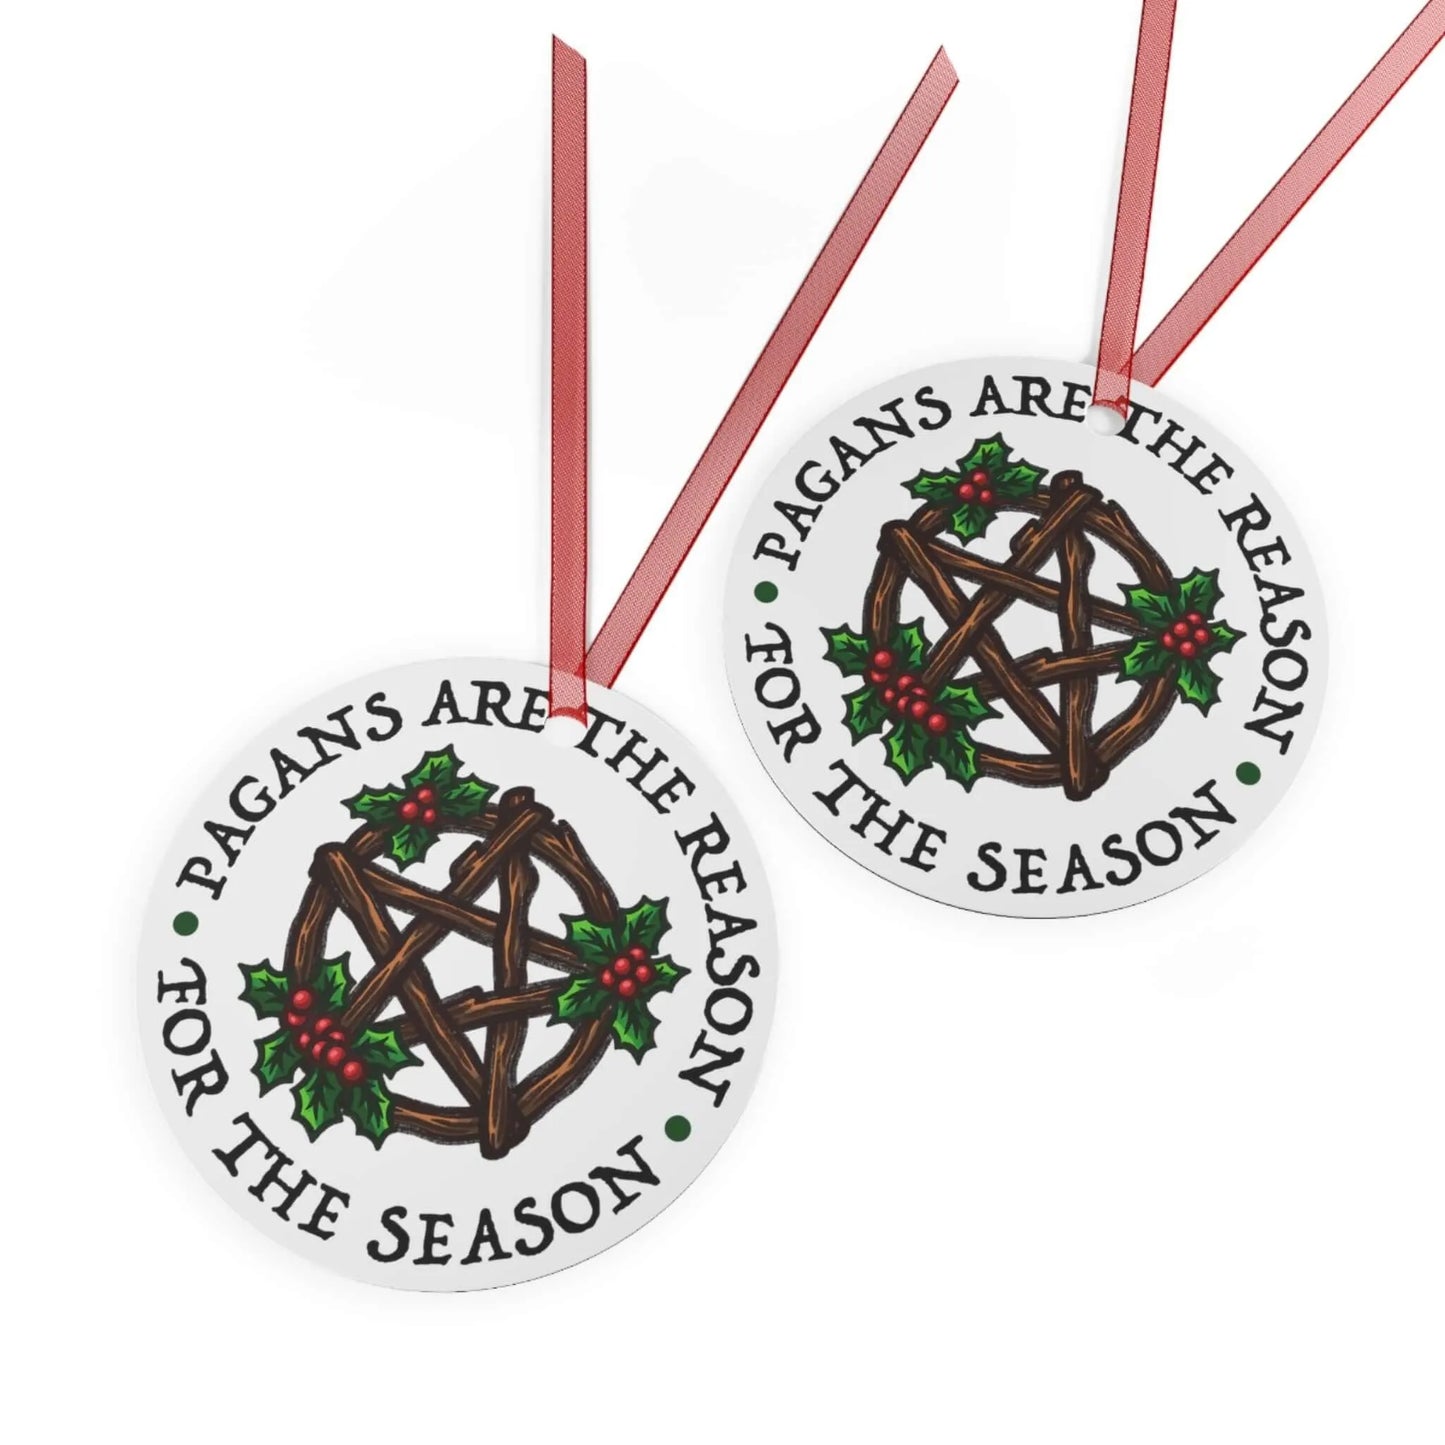 Pagans are the reason for the season round metallic witchy holiday Christmas ornament